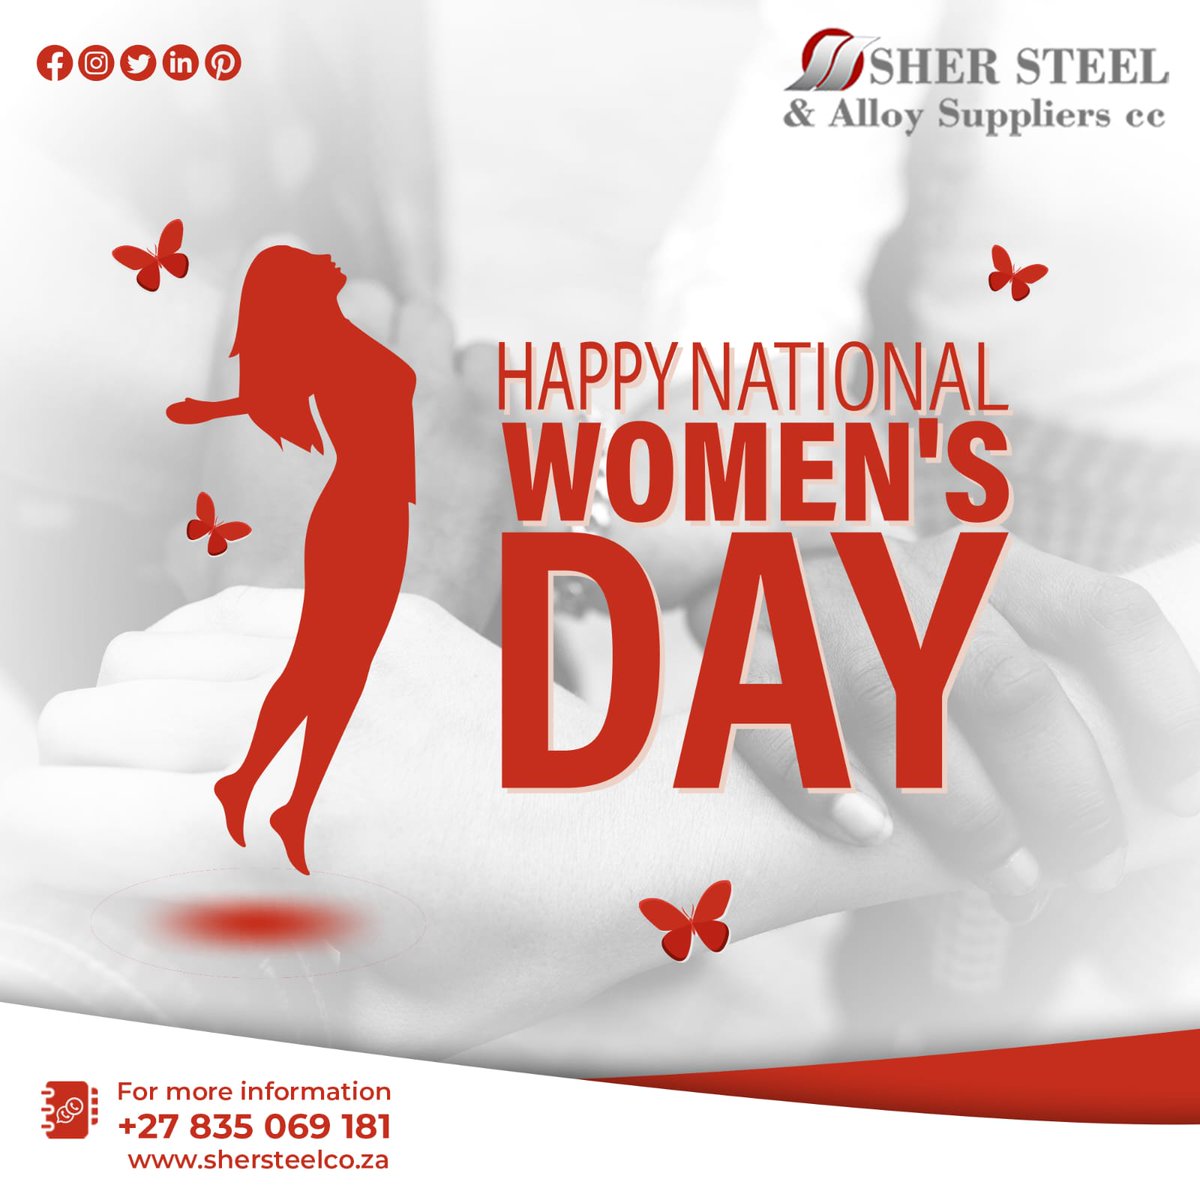 SHER STEEL & ALLOY SUPPLIERS
A premier Steel Supplier in the Gauteng region, South Africa

Wishing you a
Happy National Women's Day

#happywomensday #womensdaywishes #womensday #womensdayquotes #steel #steelsuppliers #beststeelsuppliers #steelproducts #flatbars #steeltube